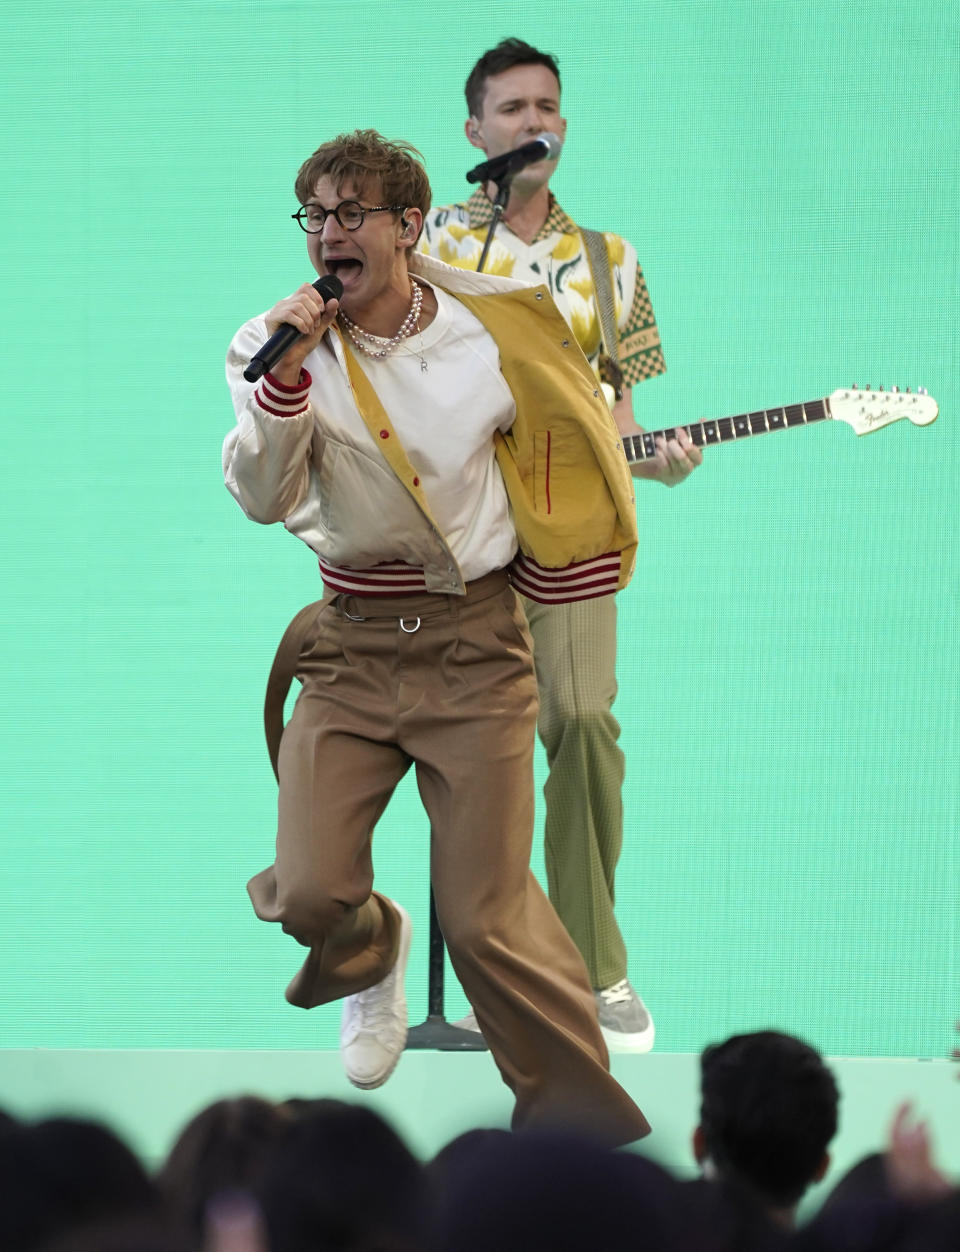 Dave Bayley, in front, and Drew MacFarlane, of Glass Animals, perform at the Billboard Music Awards on Sunday, May 23, 2021, at the Microsoft Theater in Los Angeles. (AP Photo/Chris Pizzello)